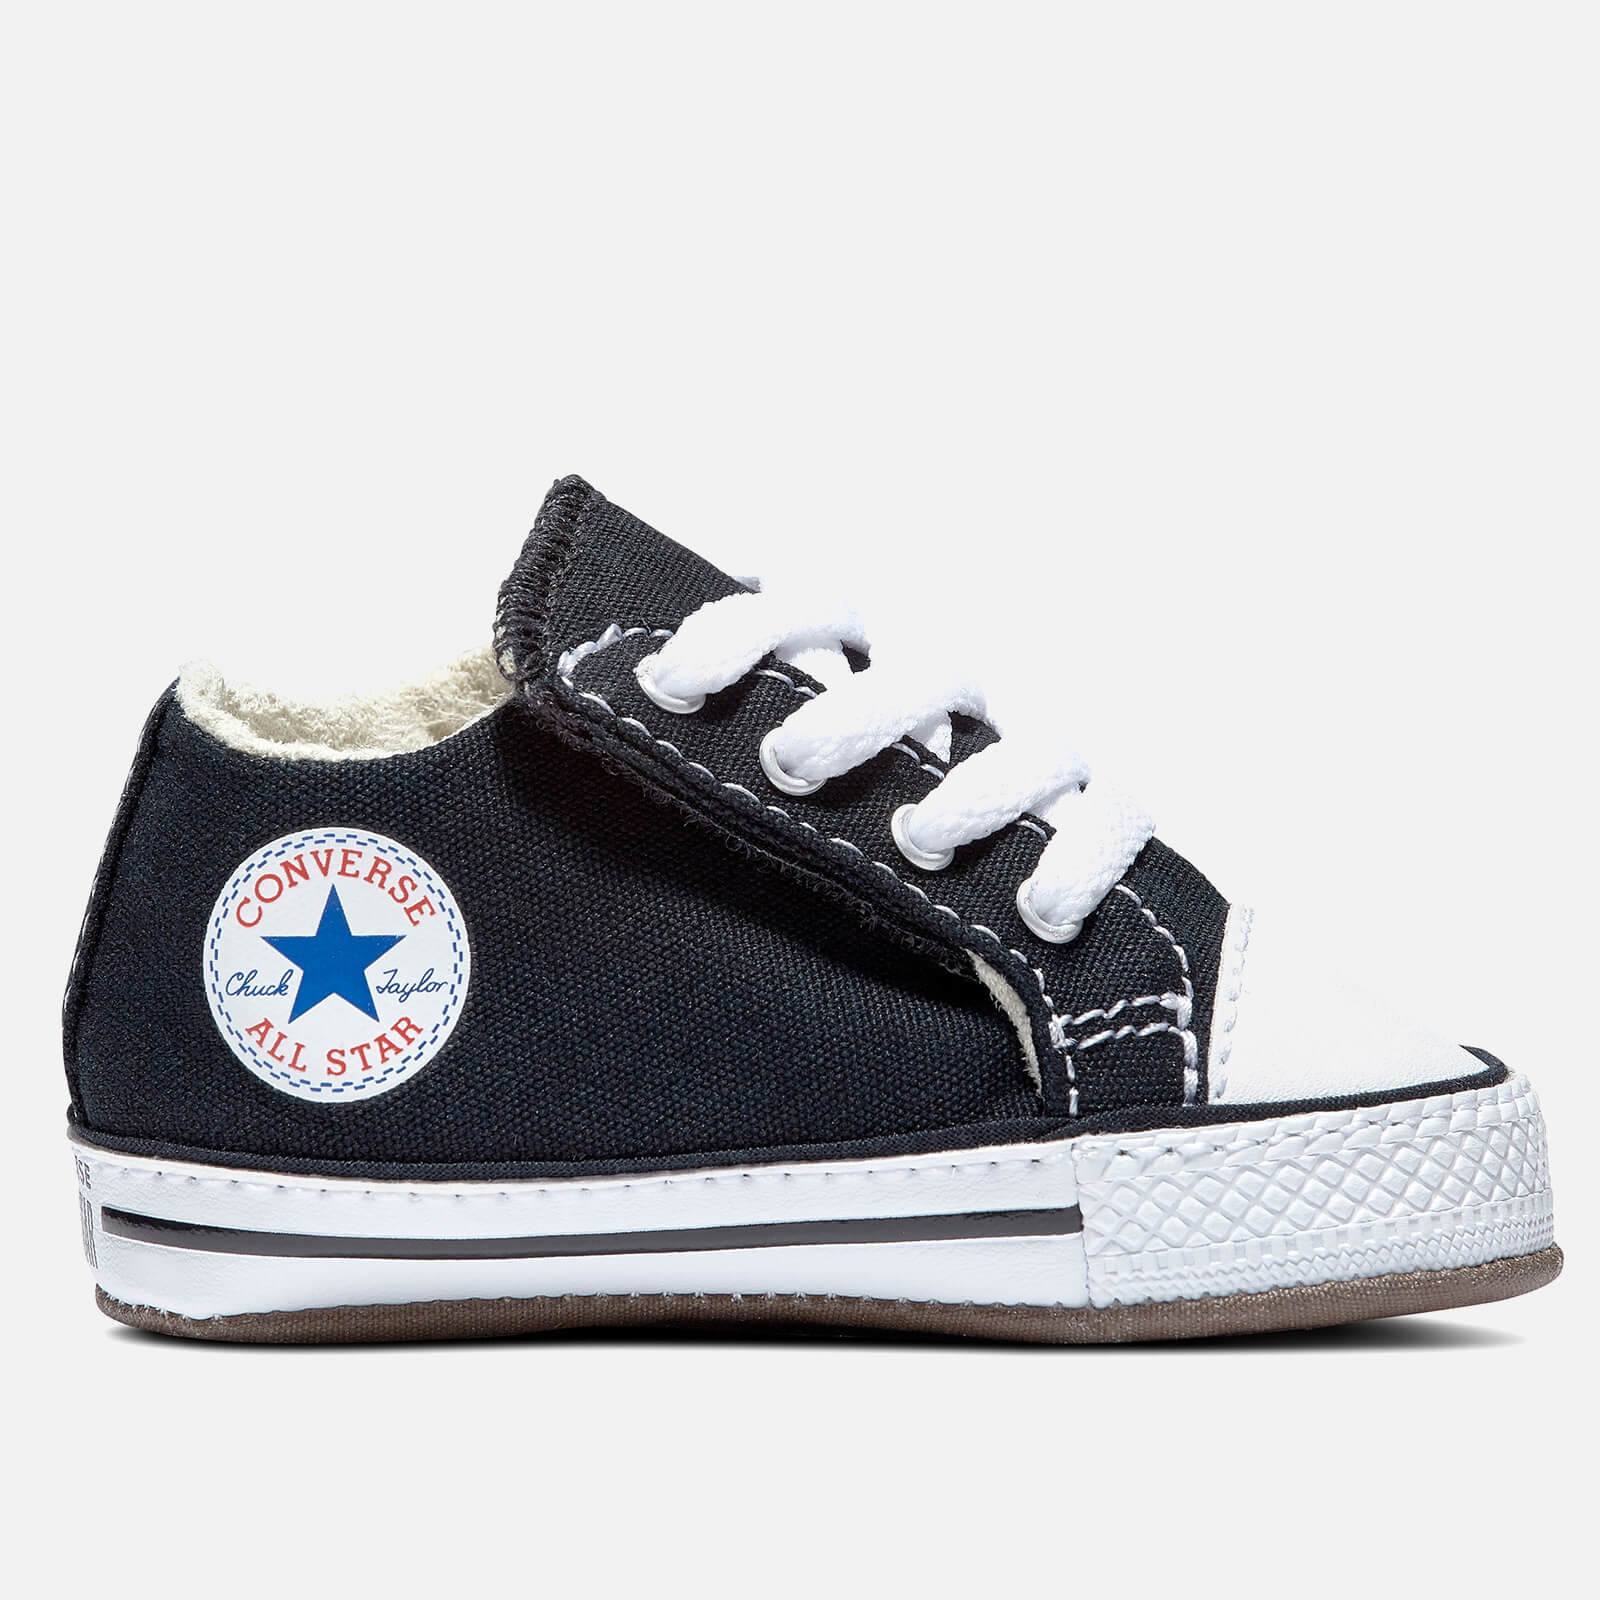 Converse Babys' Chuck Taylor All Star Cribster Soft Trainers - Black - UK 1 Baby - Black